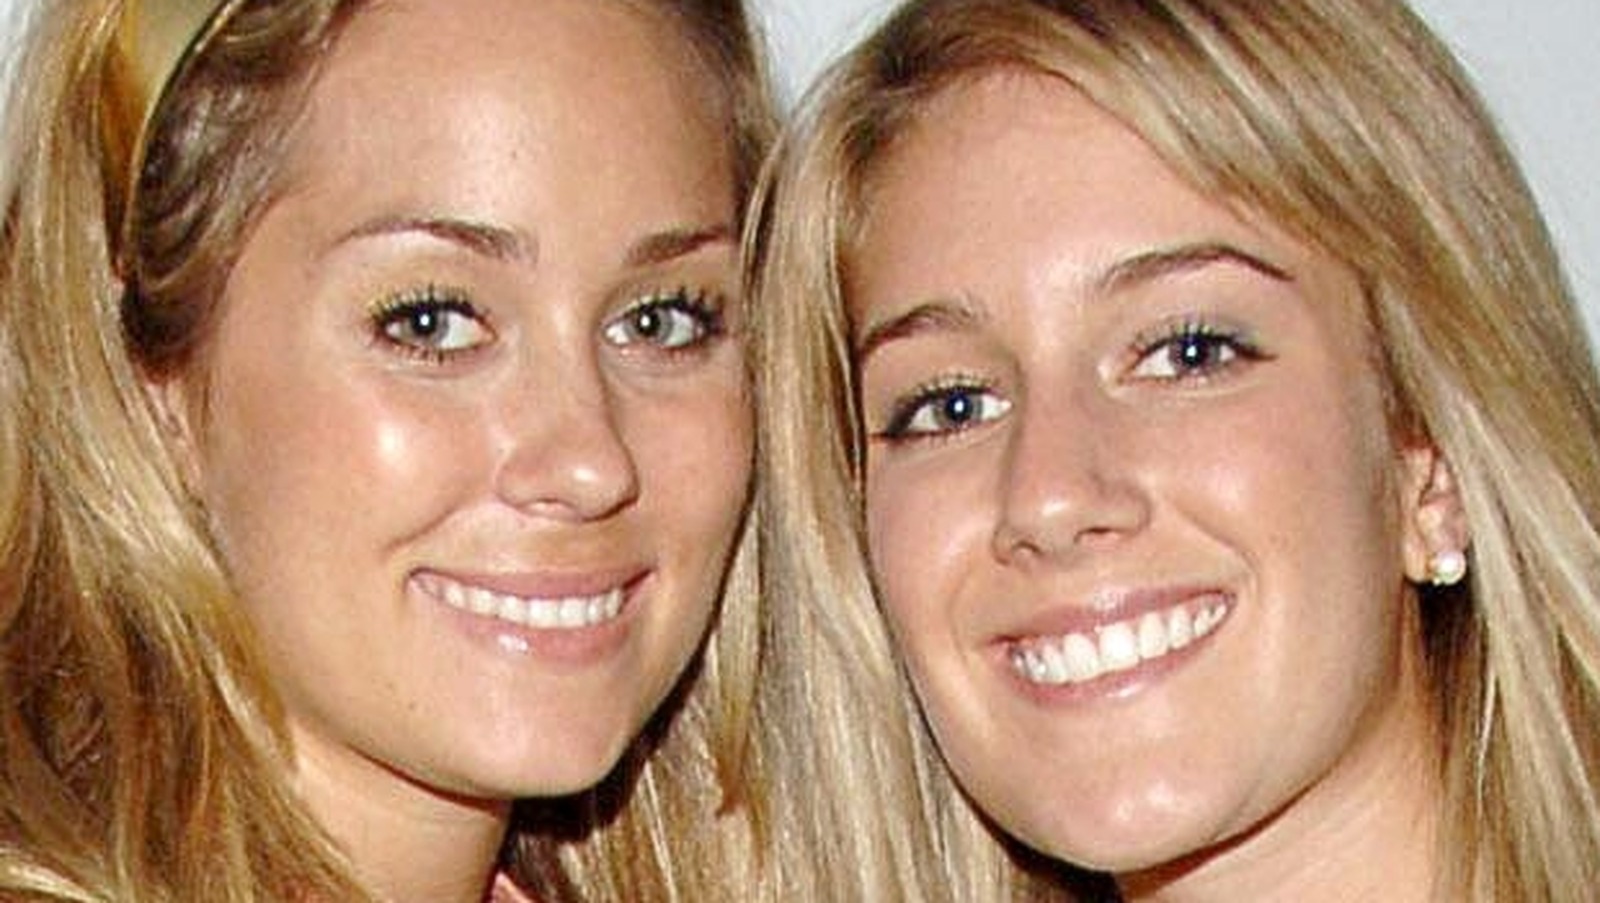 The Hills'': Lauren does the right thing